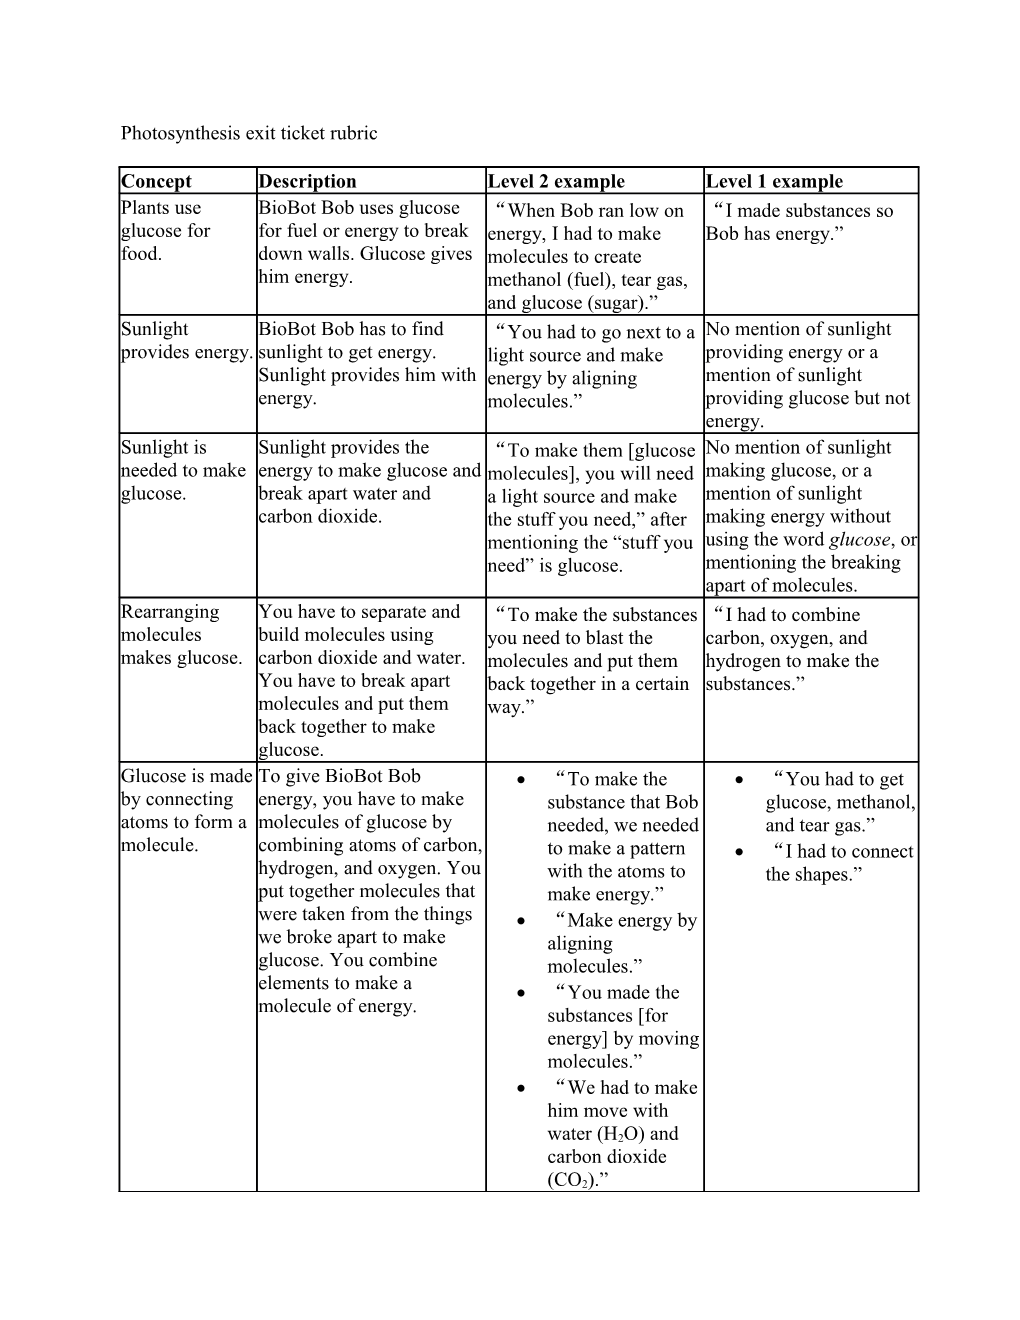 Photosynthesis Exit Ticket Rubric